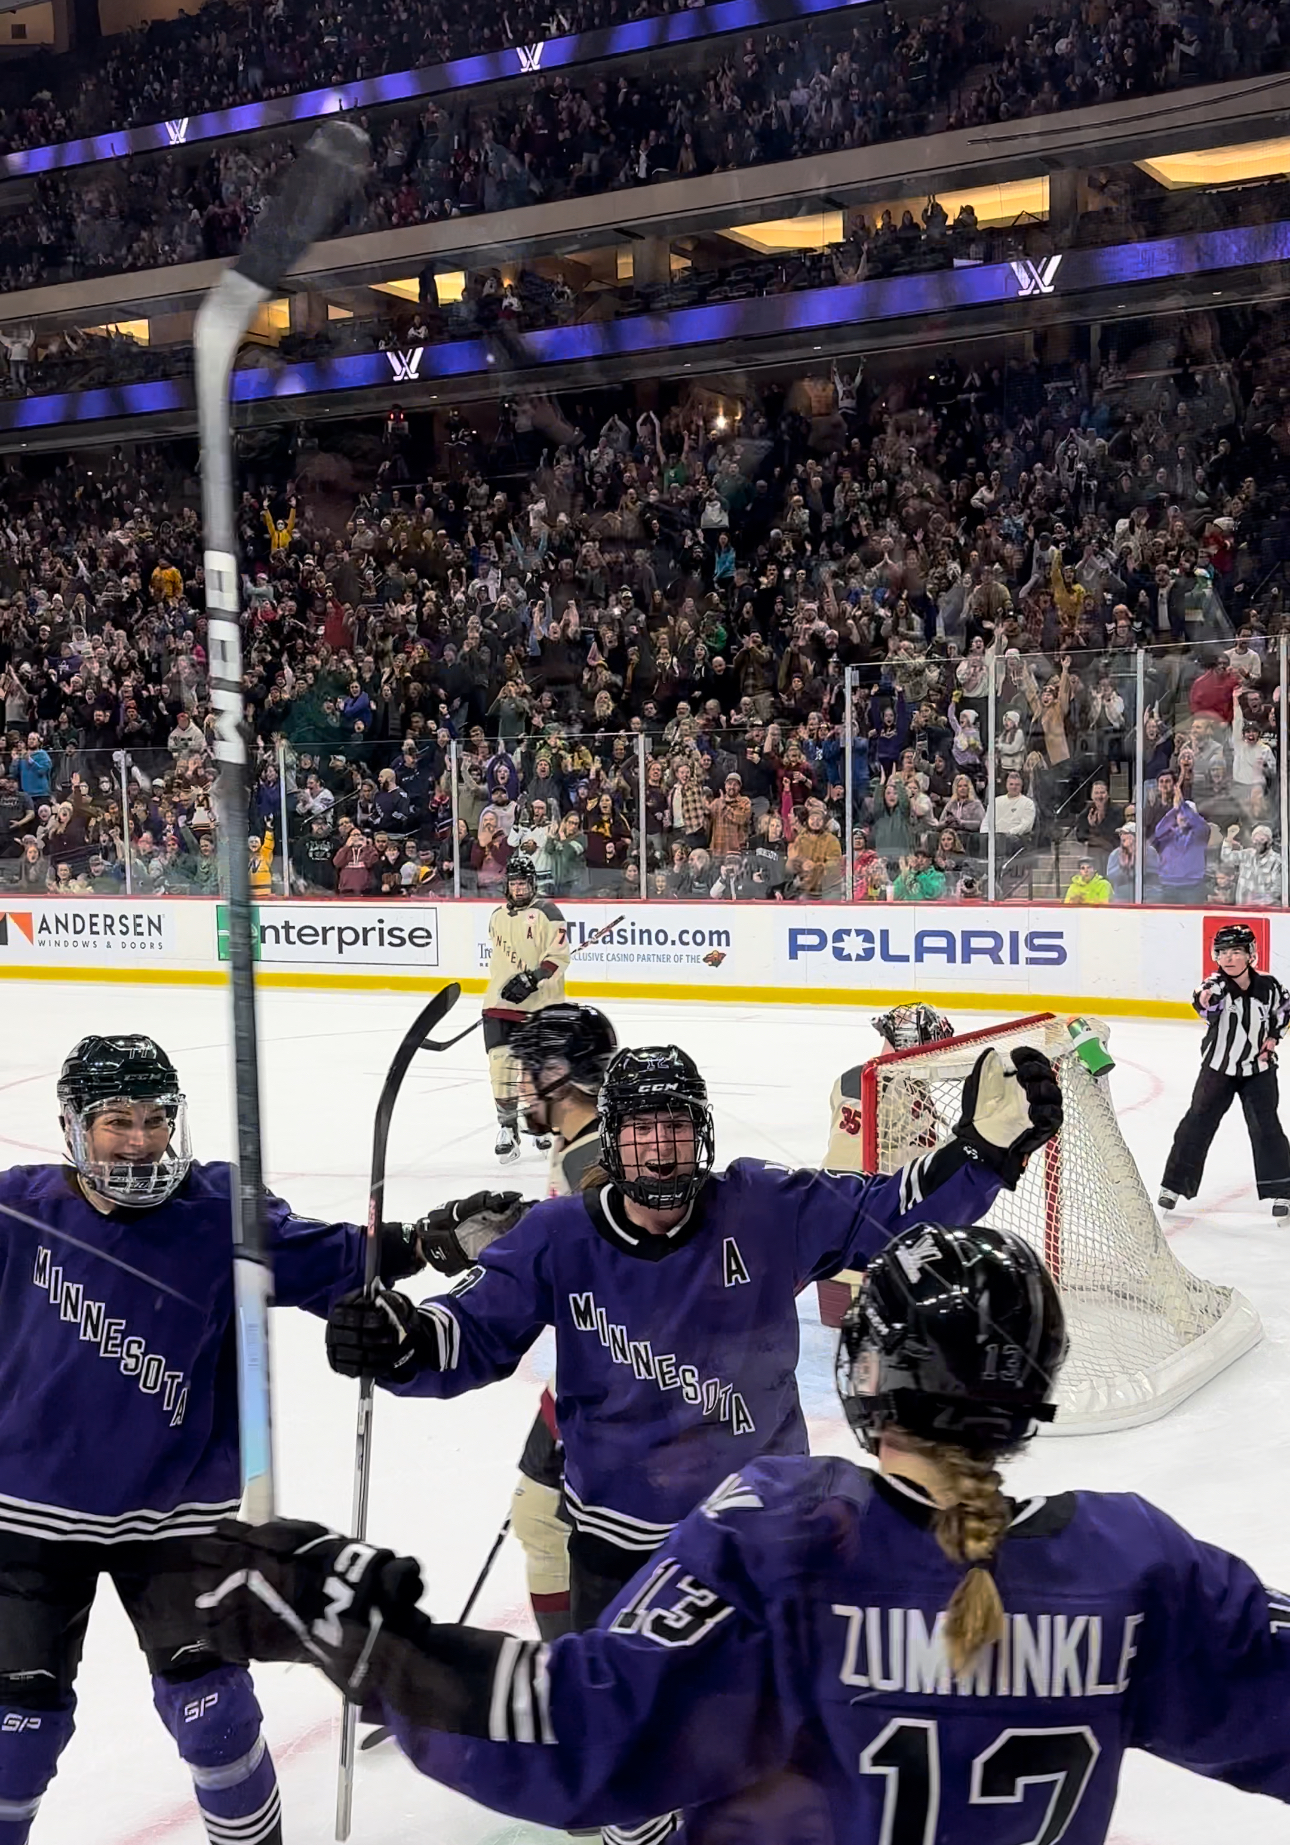 Grace Zumwinkle Scores the First Home Goal for PWHL Minnesota in Front of a Record-Setting Crowd of 13,316 at Xcel Energy Center, Jan. 6